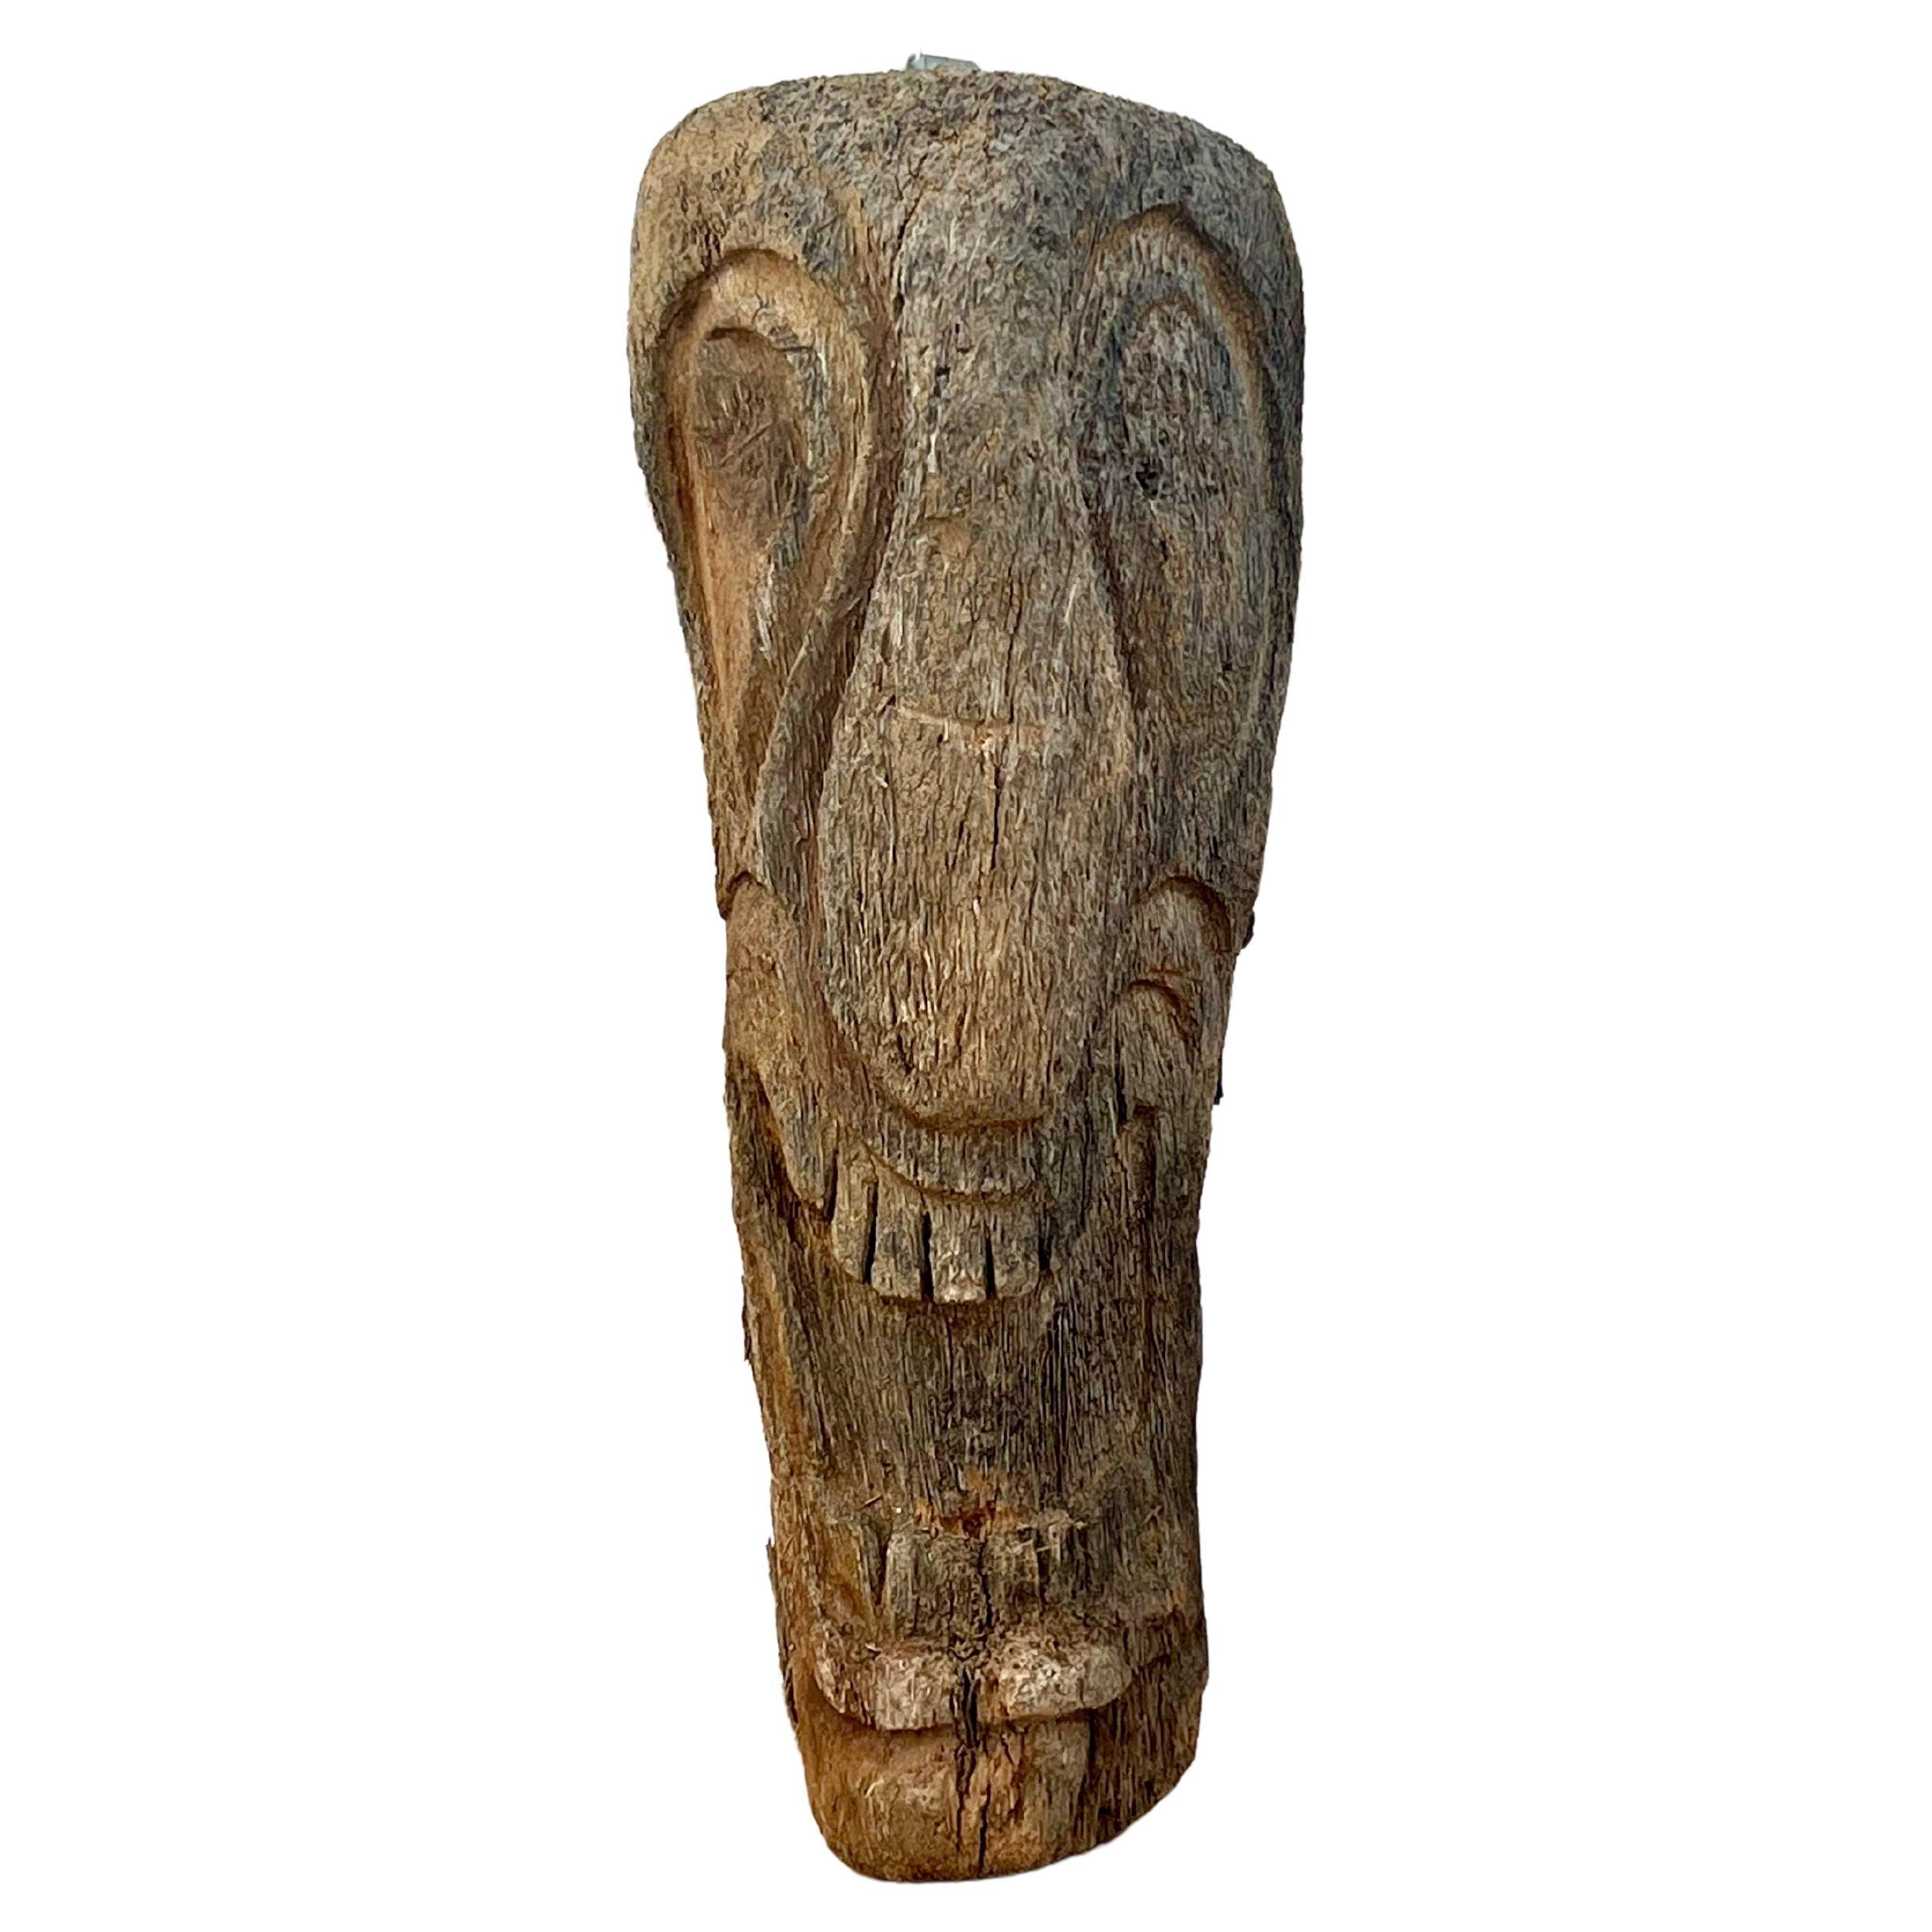 Tiki Head Sculpture from Palmwood 1960s Americana For Sale